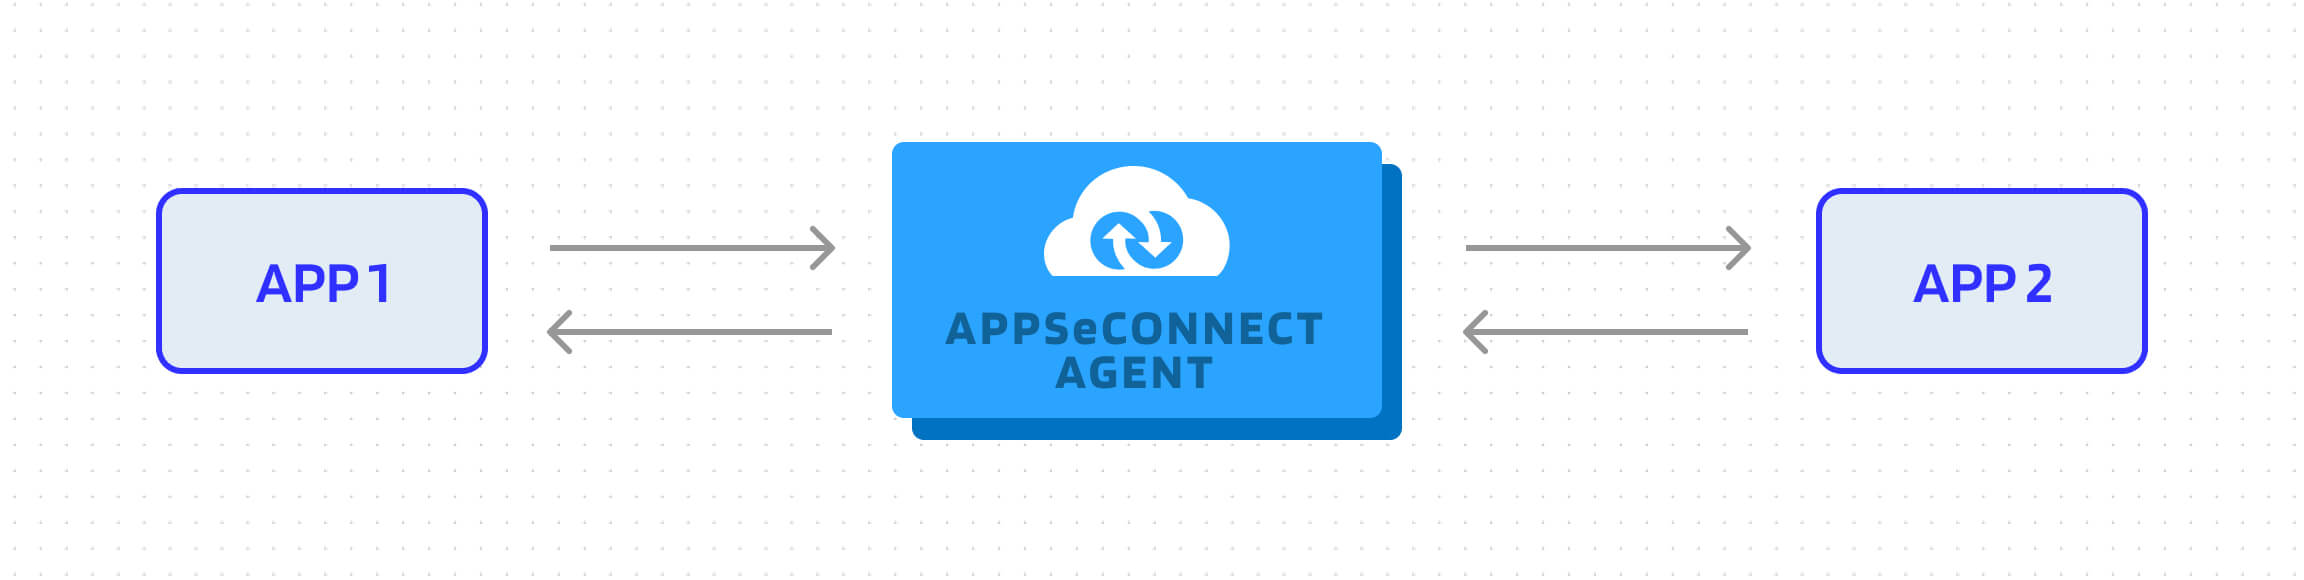 appseconnect-agent